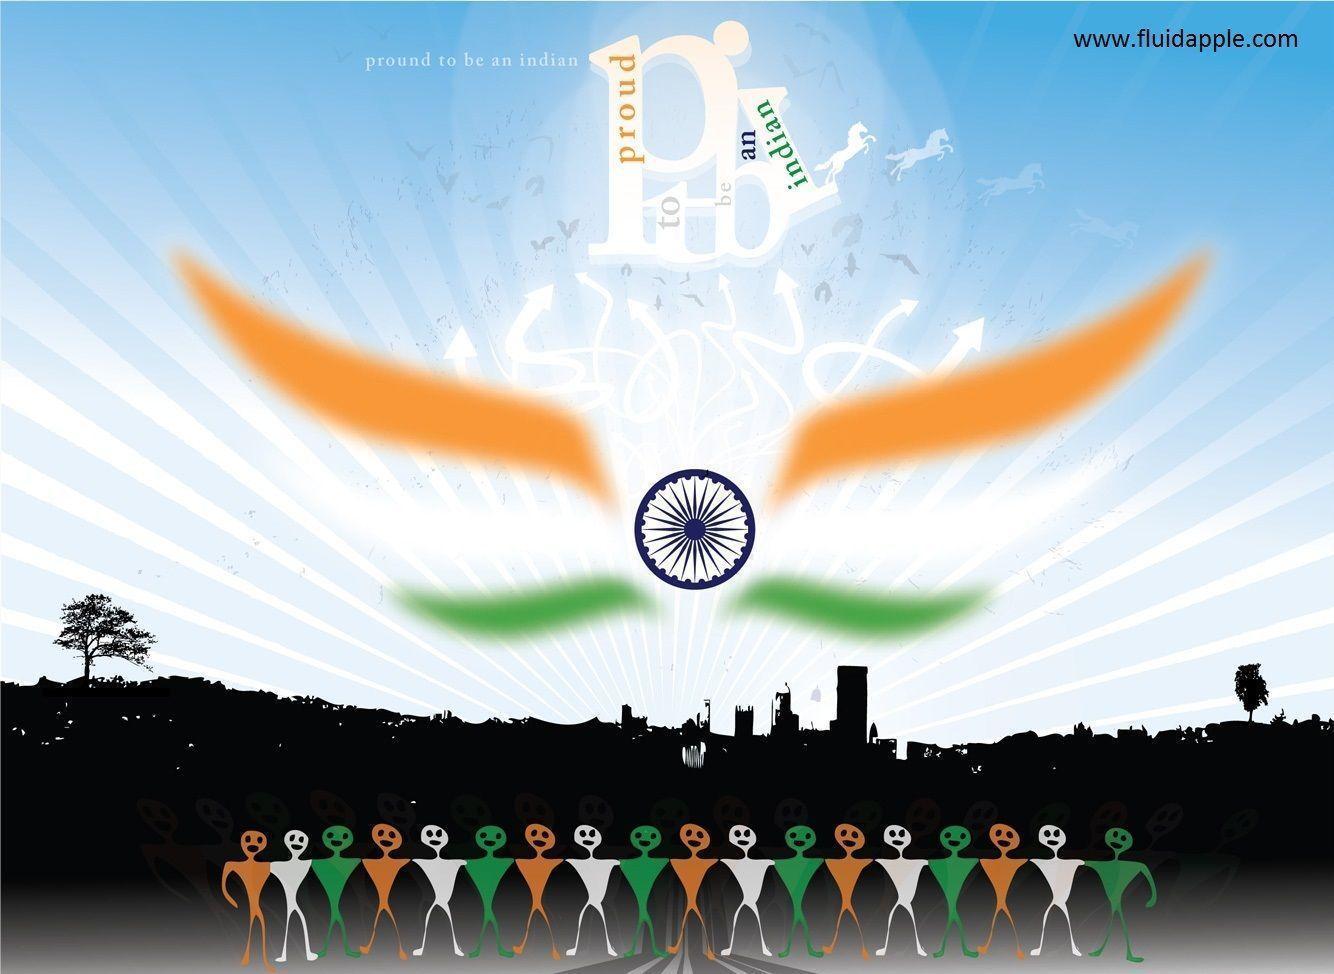 Independence Day Wallpaper Free Download. India